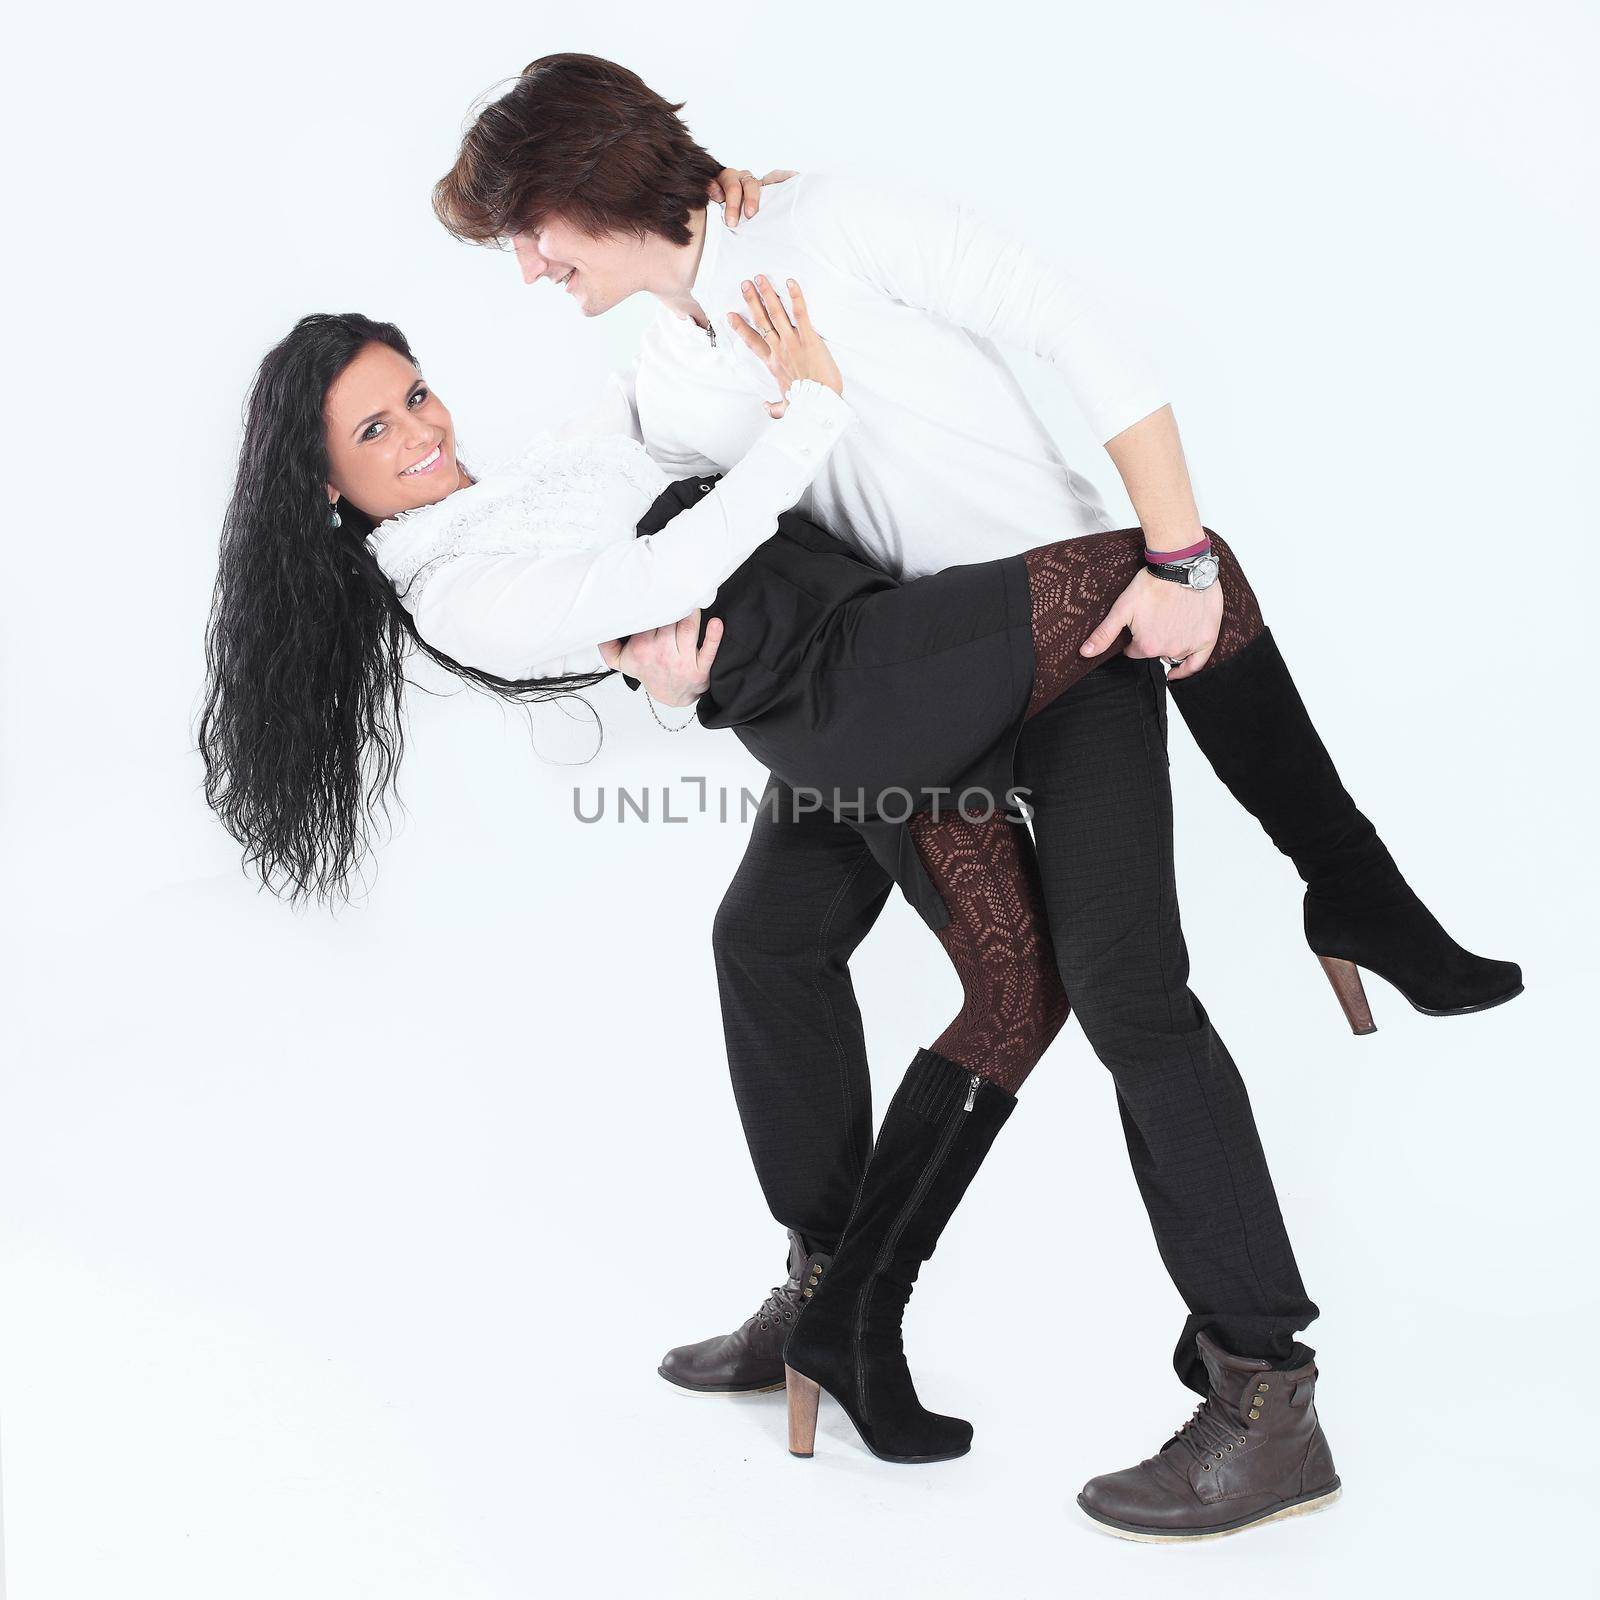 stylish pair of dancers performed the tango by SmartPhotoLab